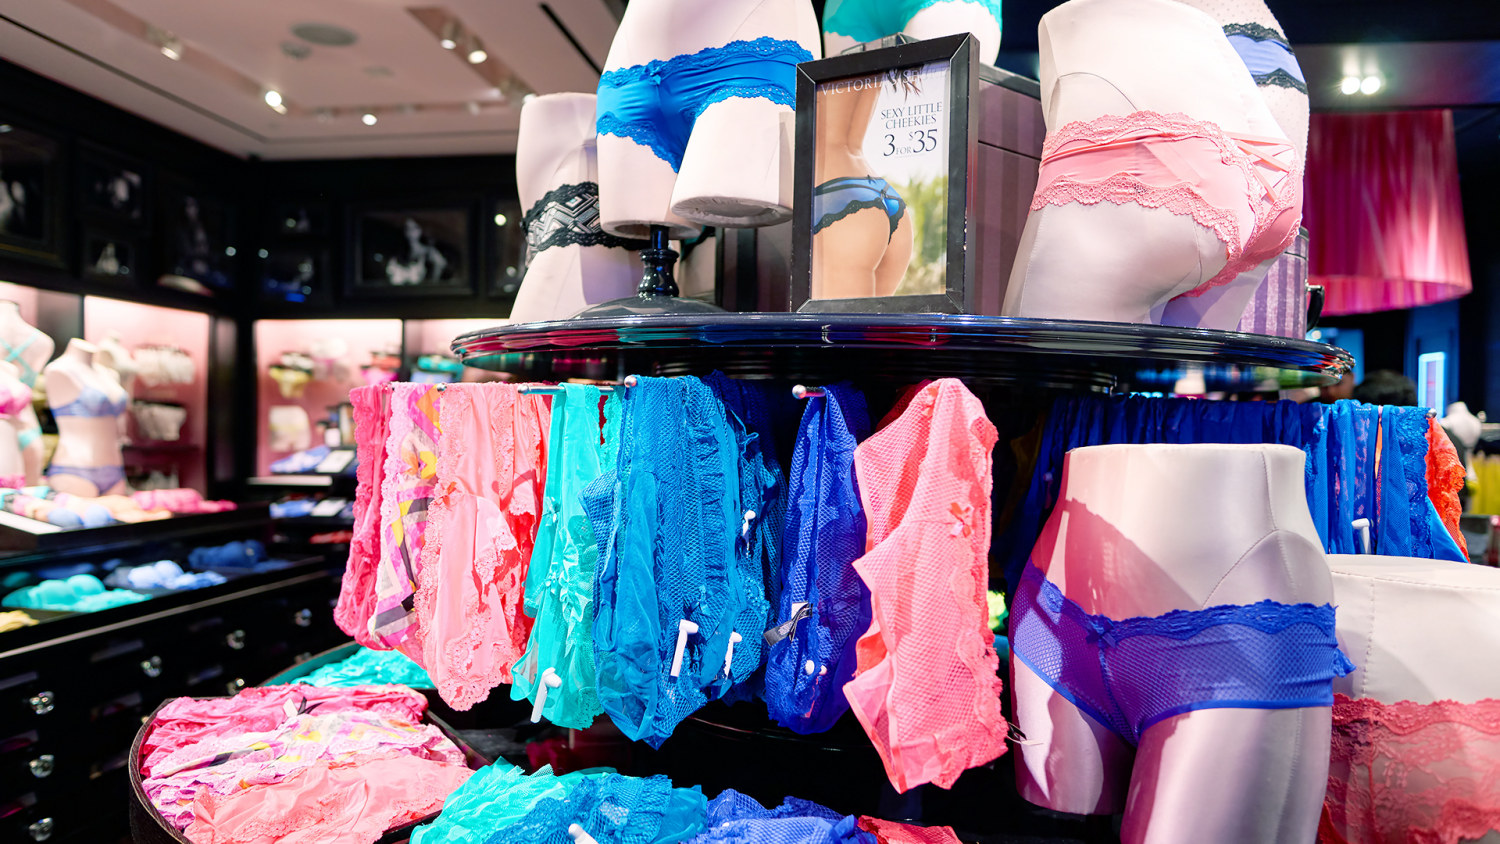 Victoria's Secret - The four-day Panty Party continues—now on sale for 7/$35!  From lace to cotton, briefs to thongs, shop the celebration before time  runs out. Shop Now